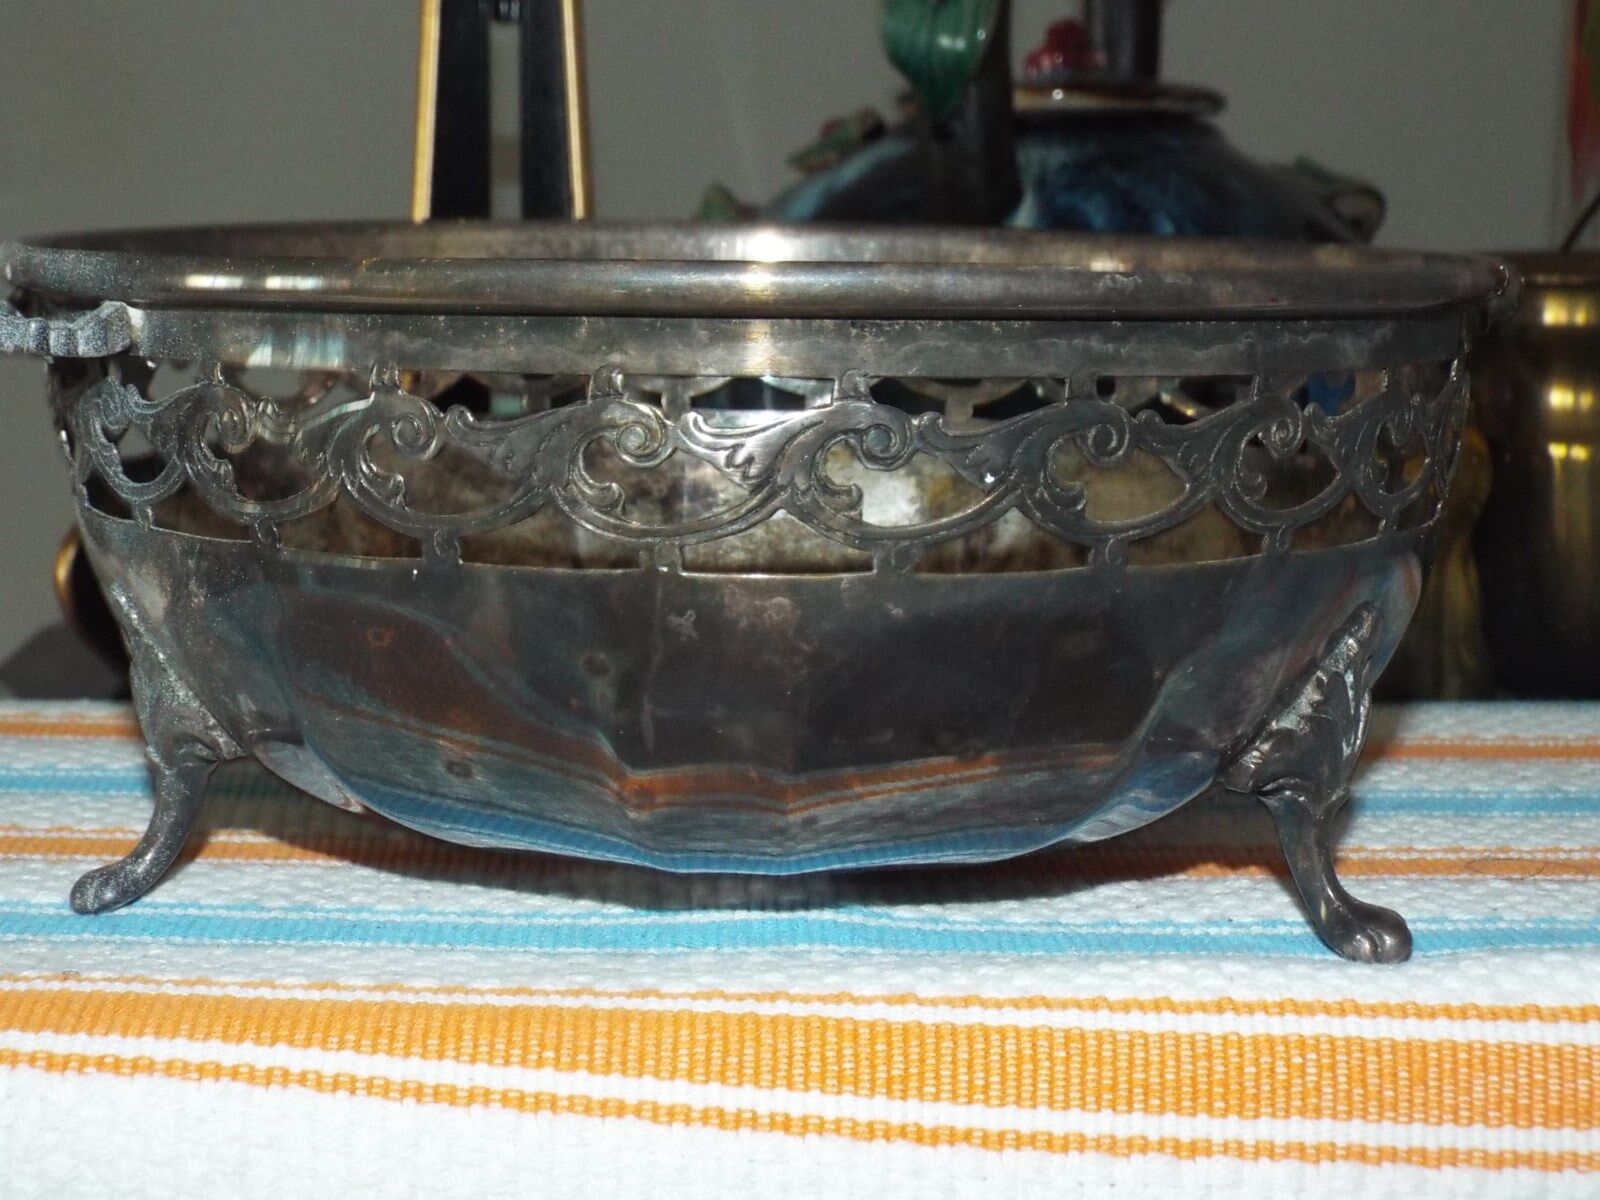 Silver Plate Decorative Bowl By Londale of Sherfield, ENG. Art Deco Period